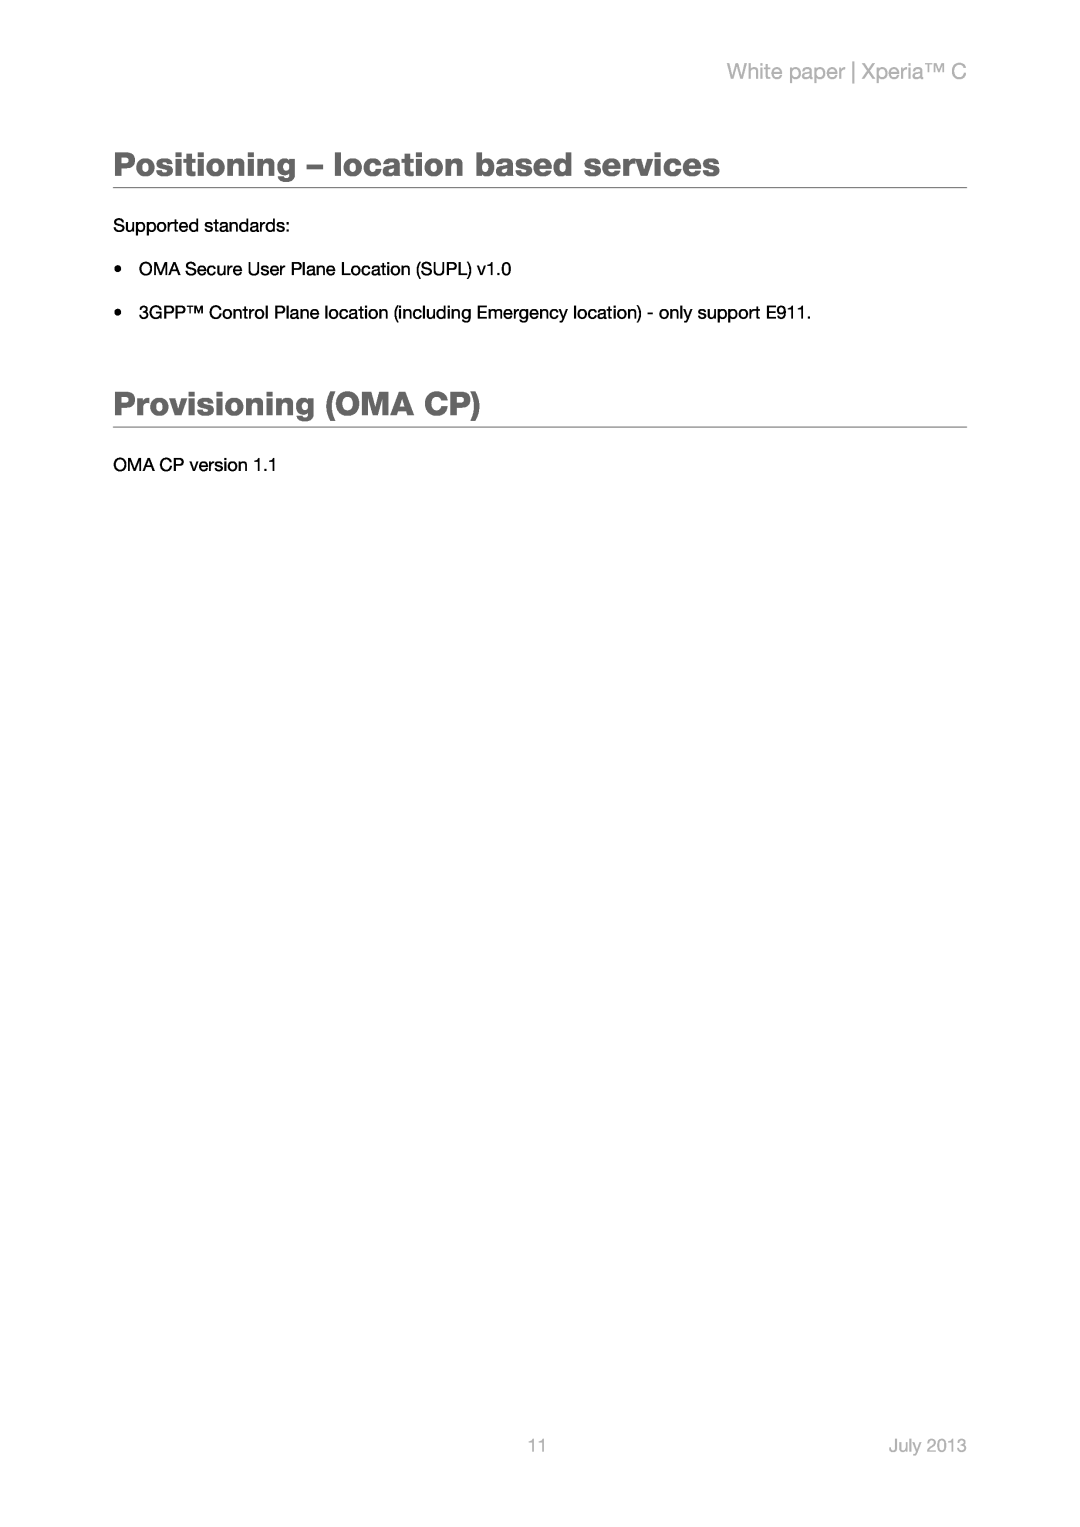 Sony s39h manual Positioning - location based services, Provisioning OMA CP, White paper Xperia C, OMA CP version, July 